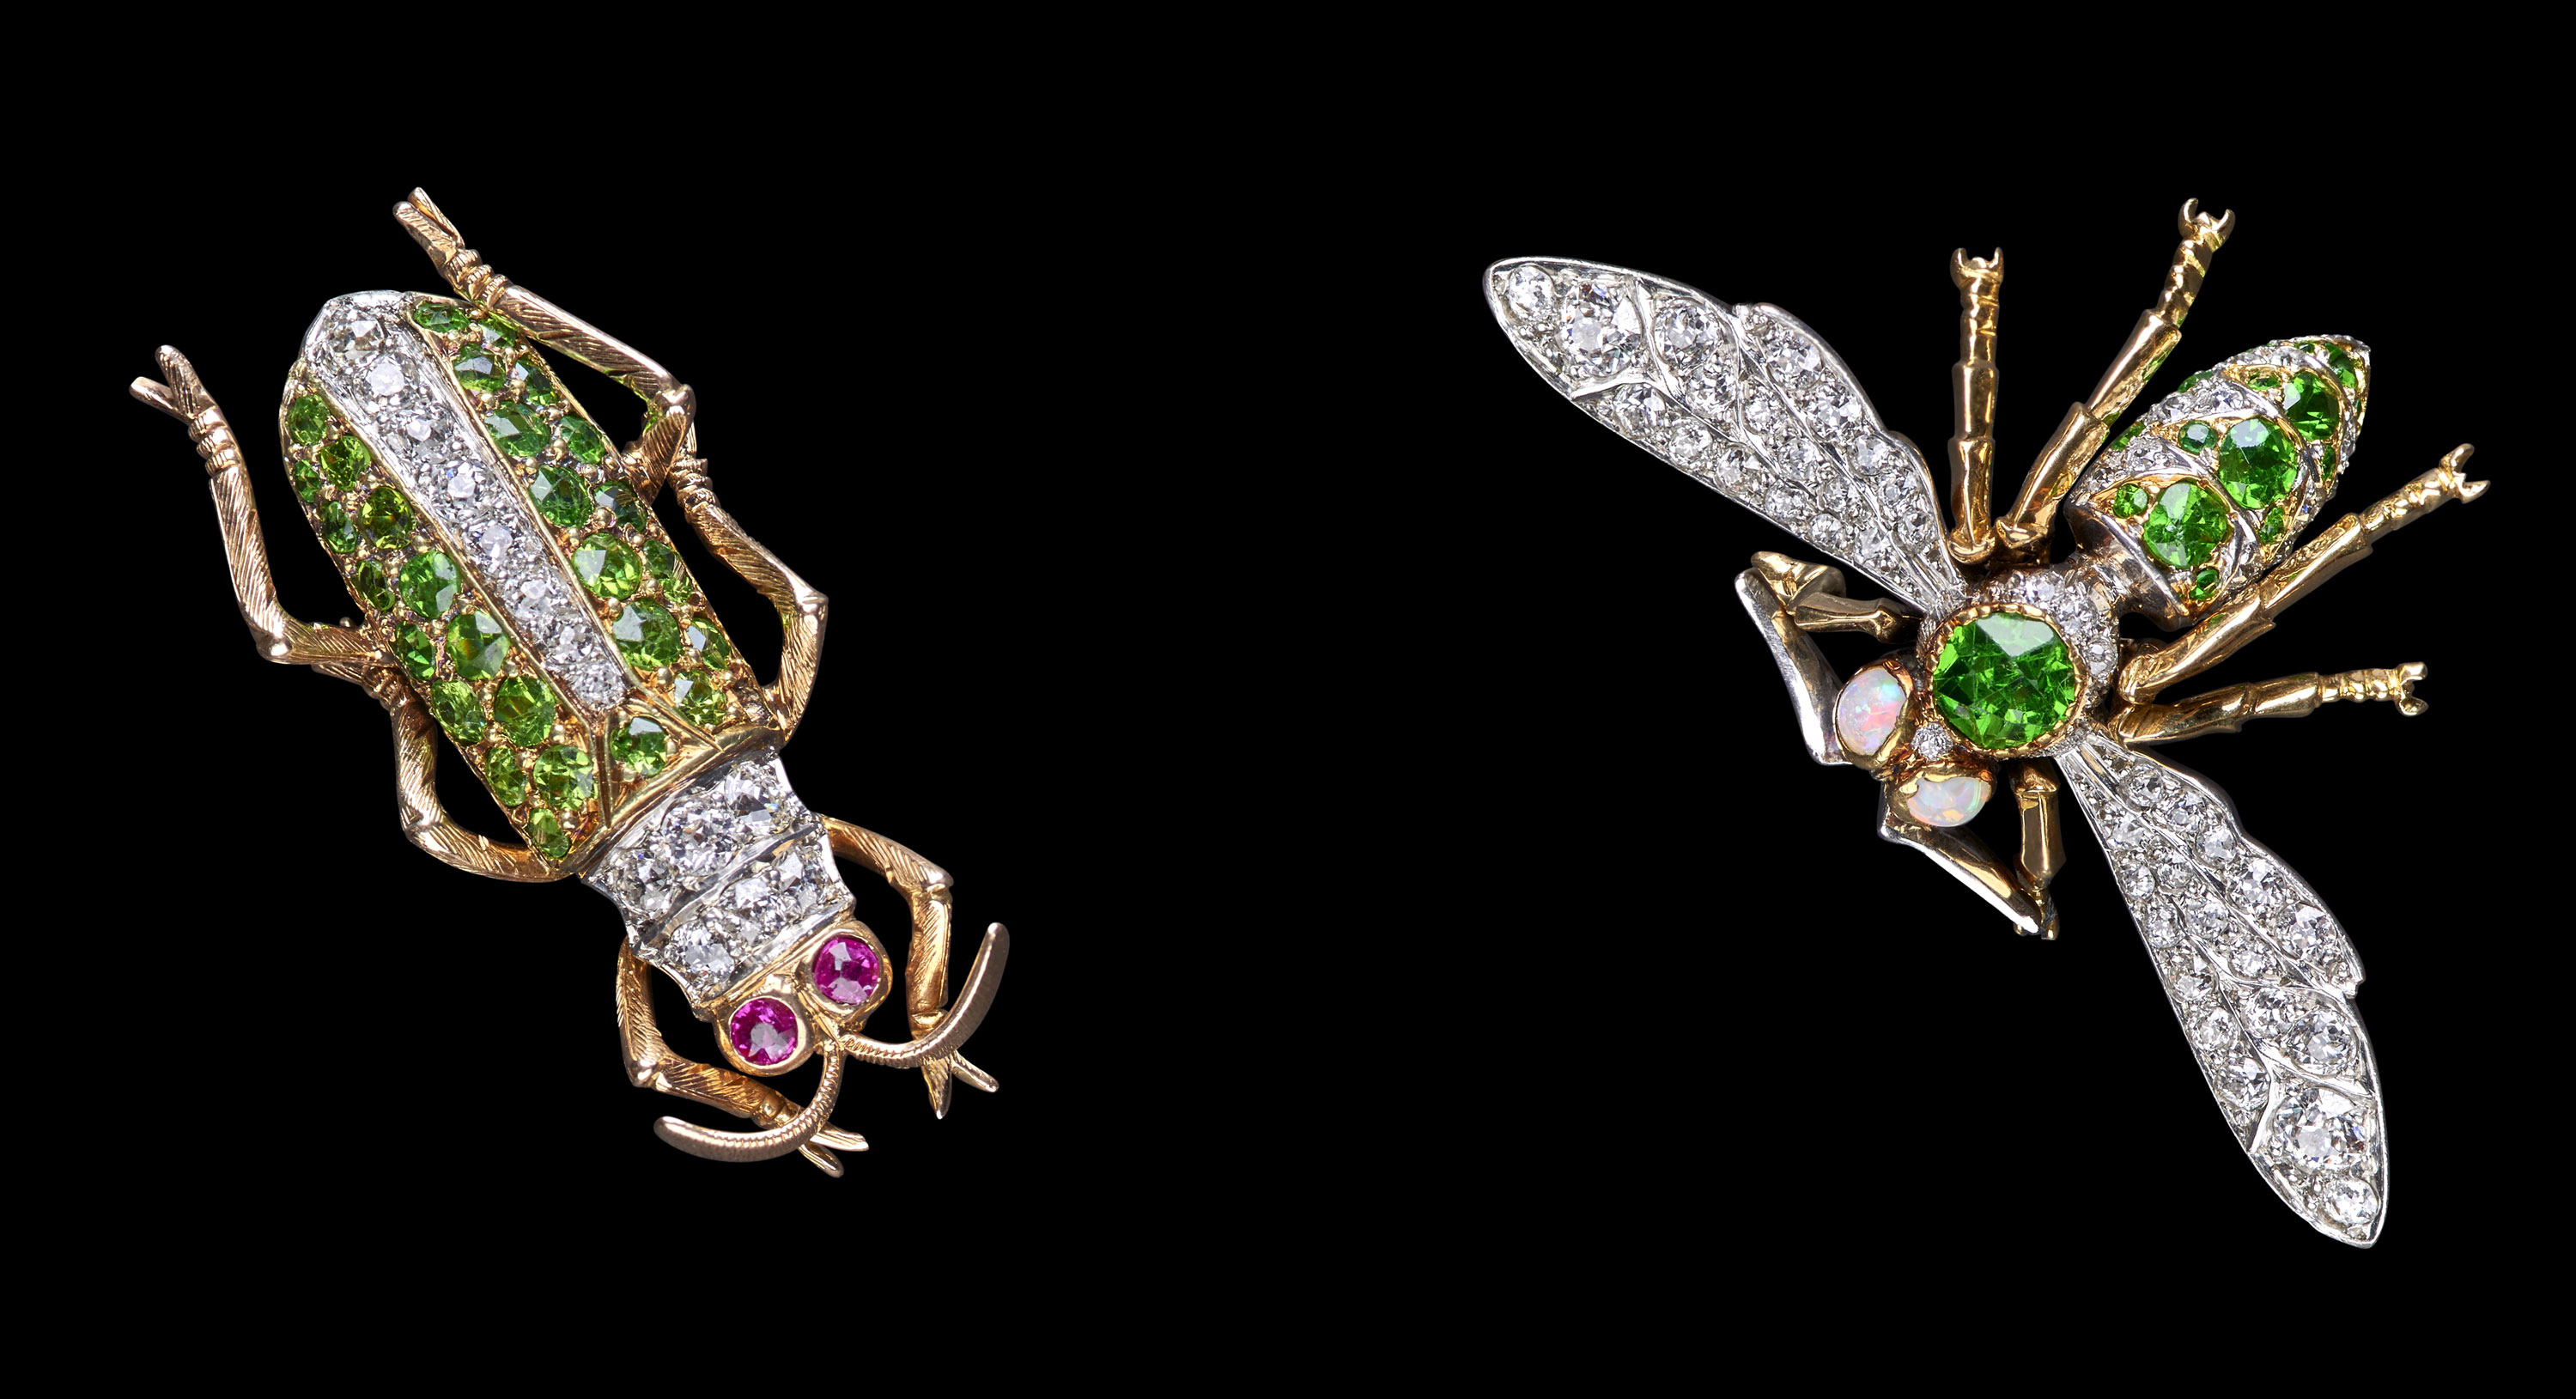 Two 19th Century beetle and fly brooches by Eliane Fattal